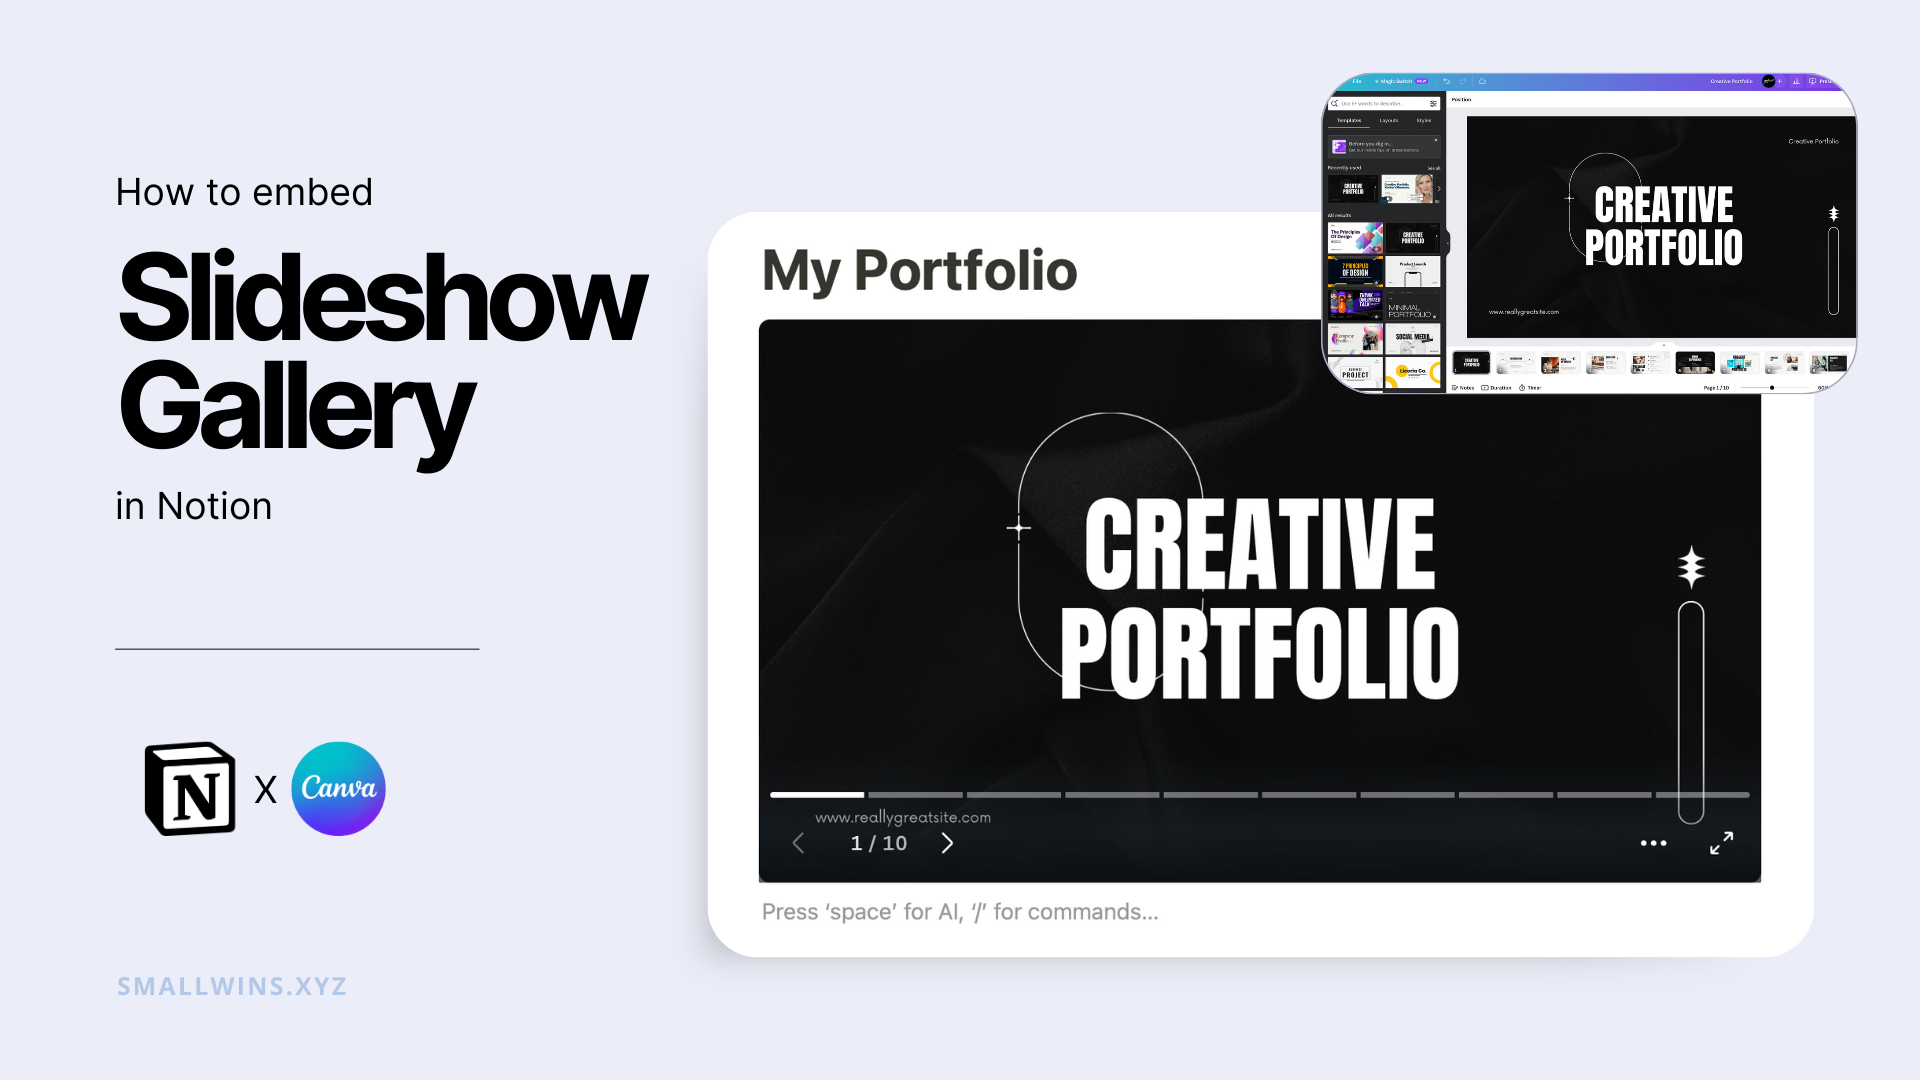 How to Create a Slideshow Gallery in Notion